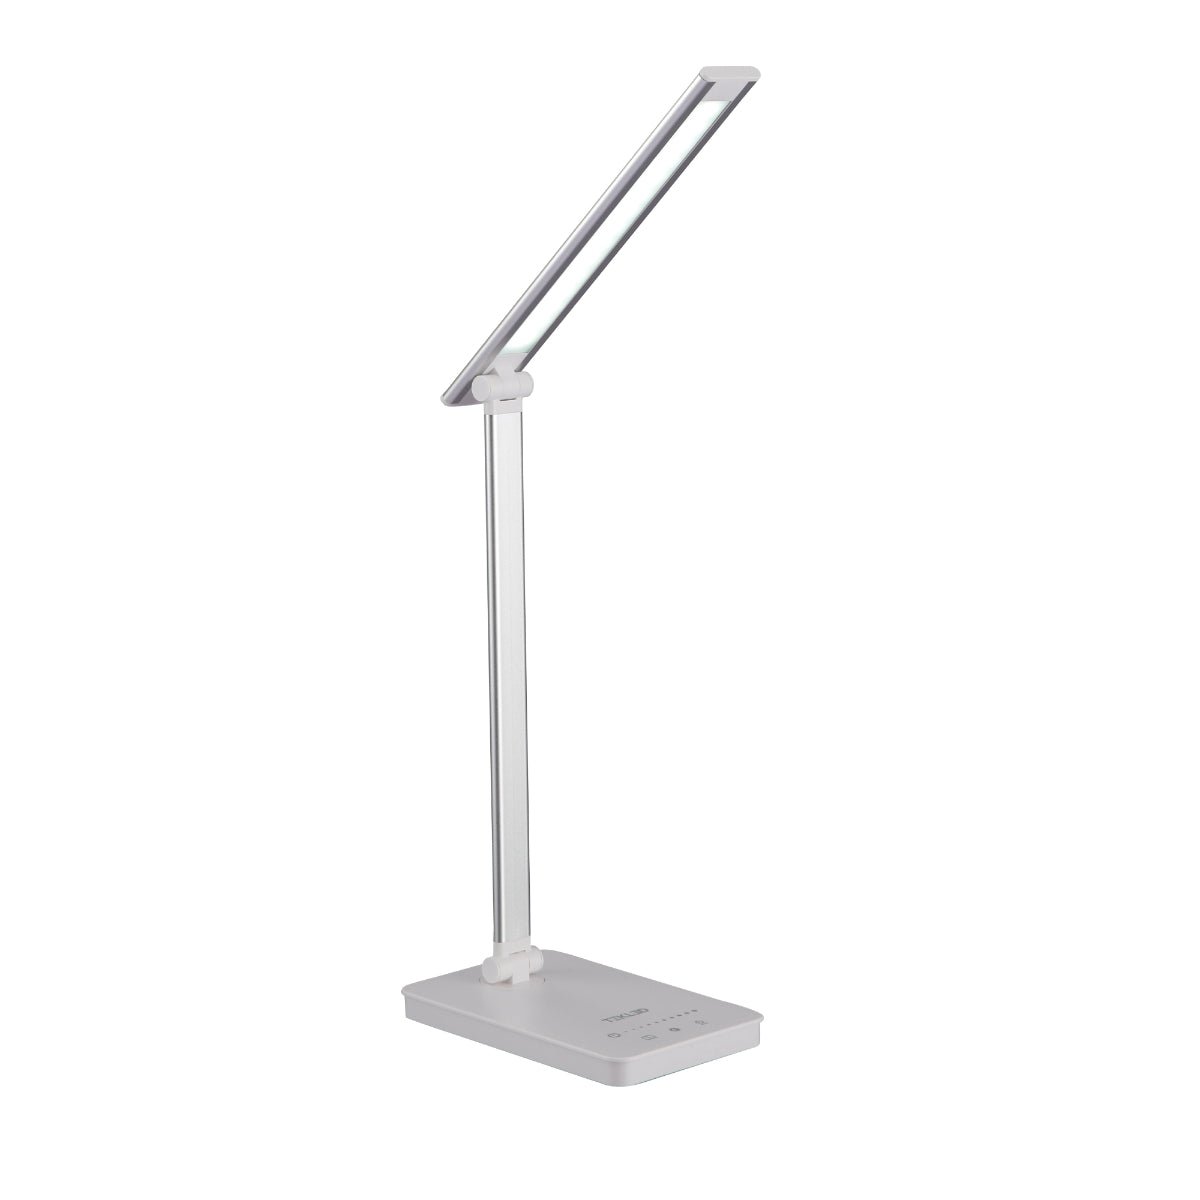 Main image of Zingo Silver Desk Light Dimmable and Colour Modes | TEKLED 130-03616